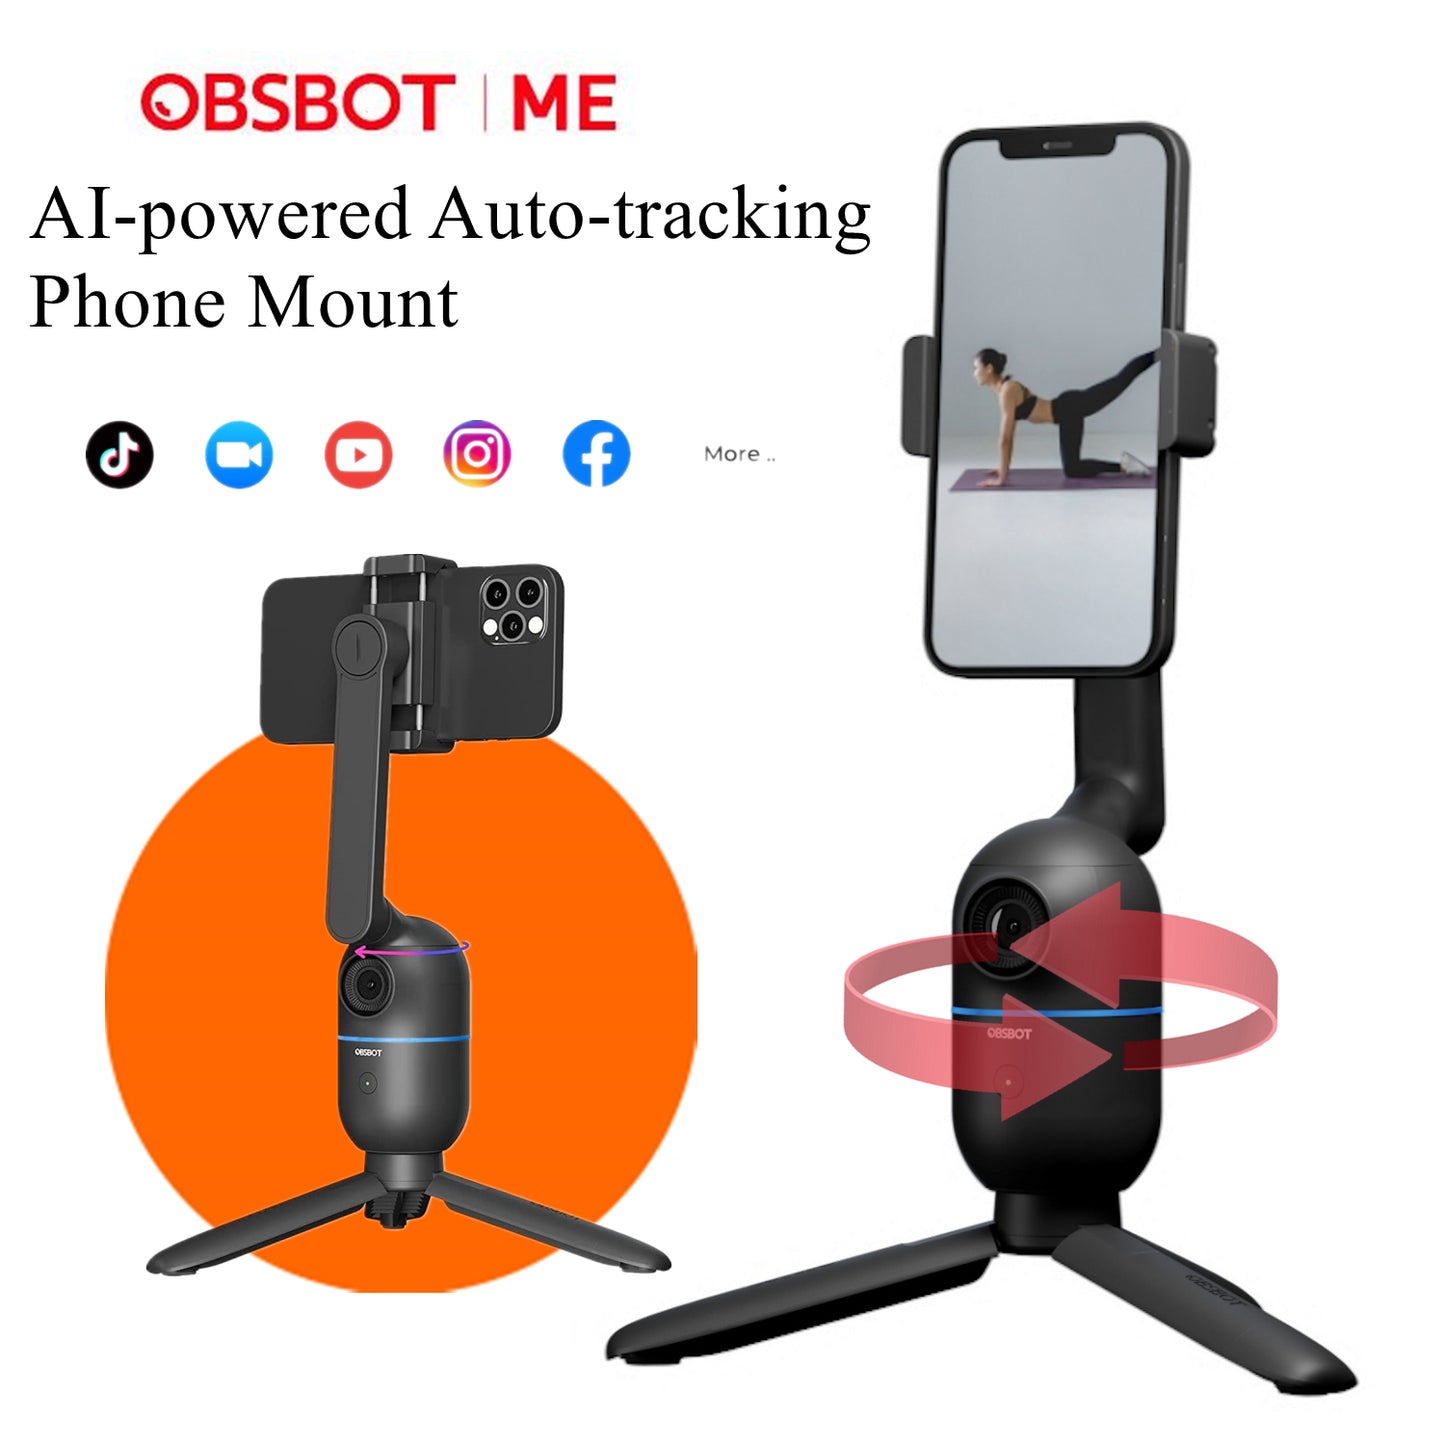 OBSBOT Me AI-powered Selfie Phone Mount Gimabal